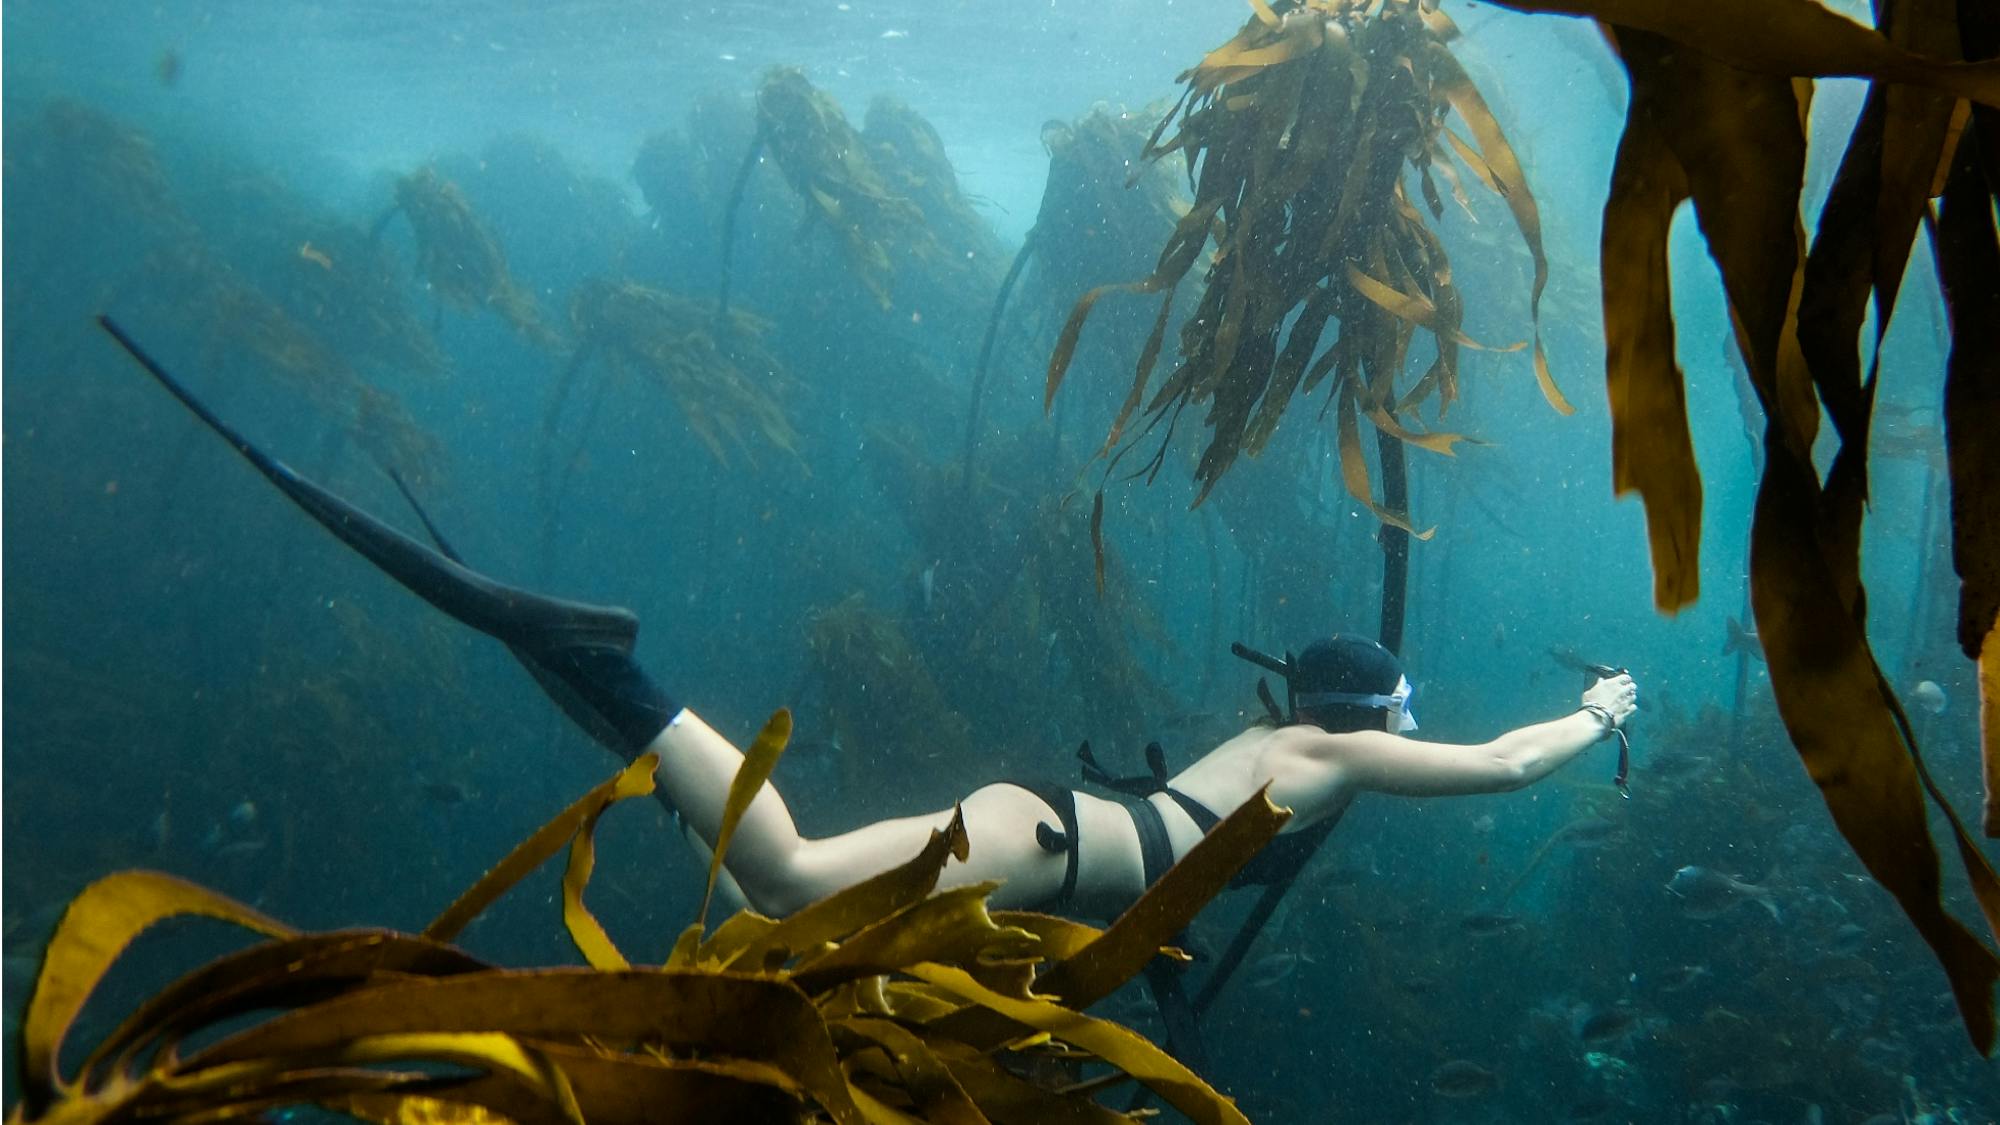 Co-director Pippa Ehrlich swims through the kelp forest wearing long black flippers and a bathing suit that belies how cold it can get in the waters near Cape Town. She points a small camera in front of her. Kelp and myriad fish move with the current.